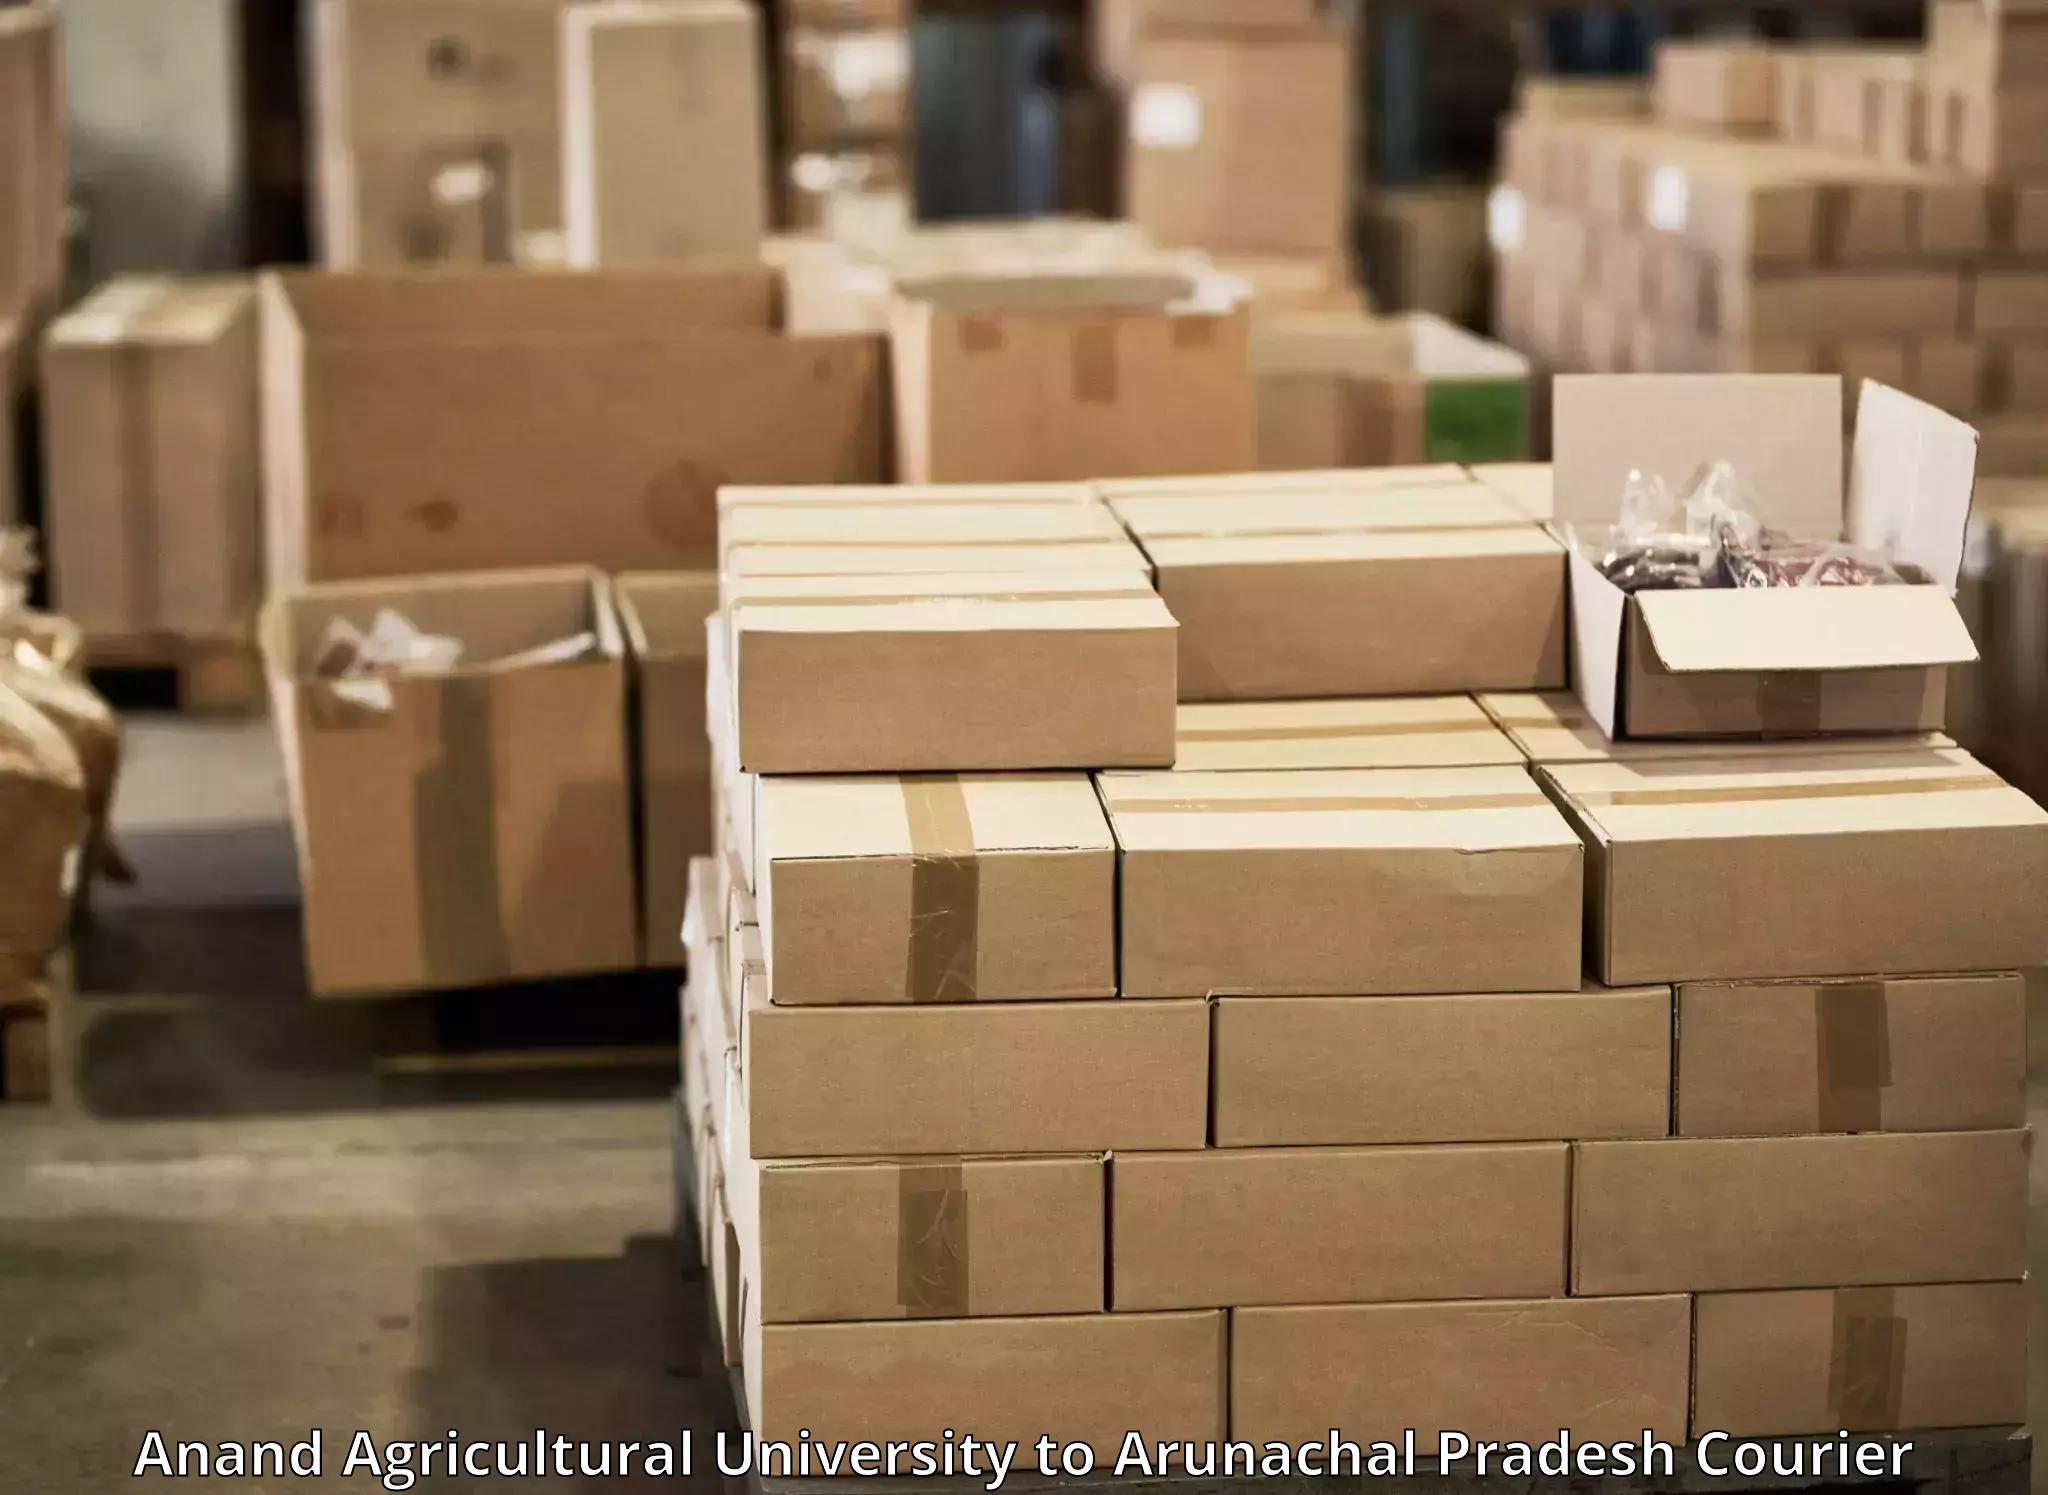 High-speed logistics services Anand Agricultural University to Chowkham